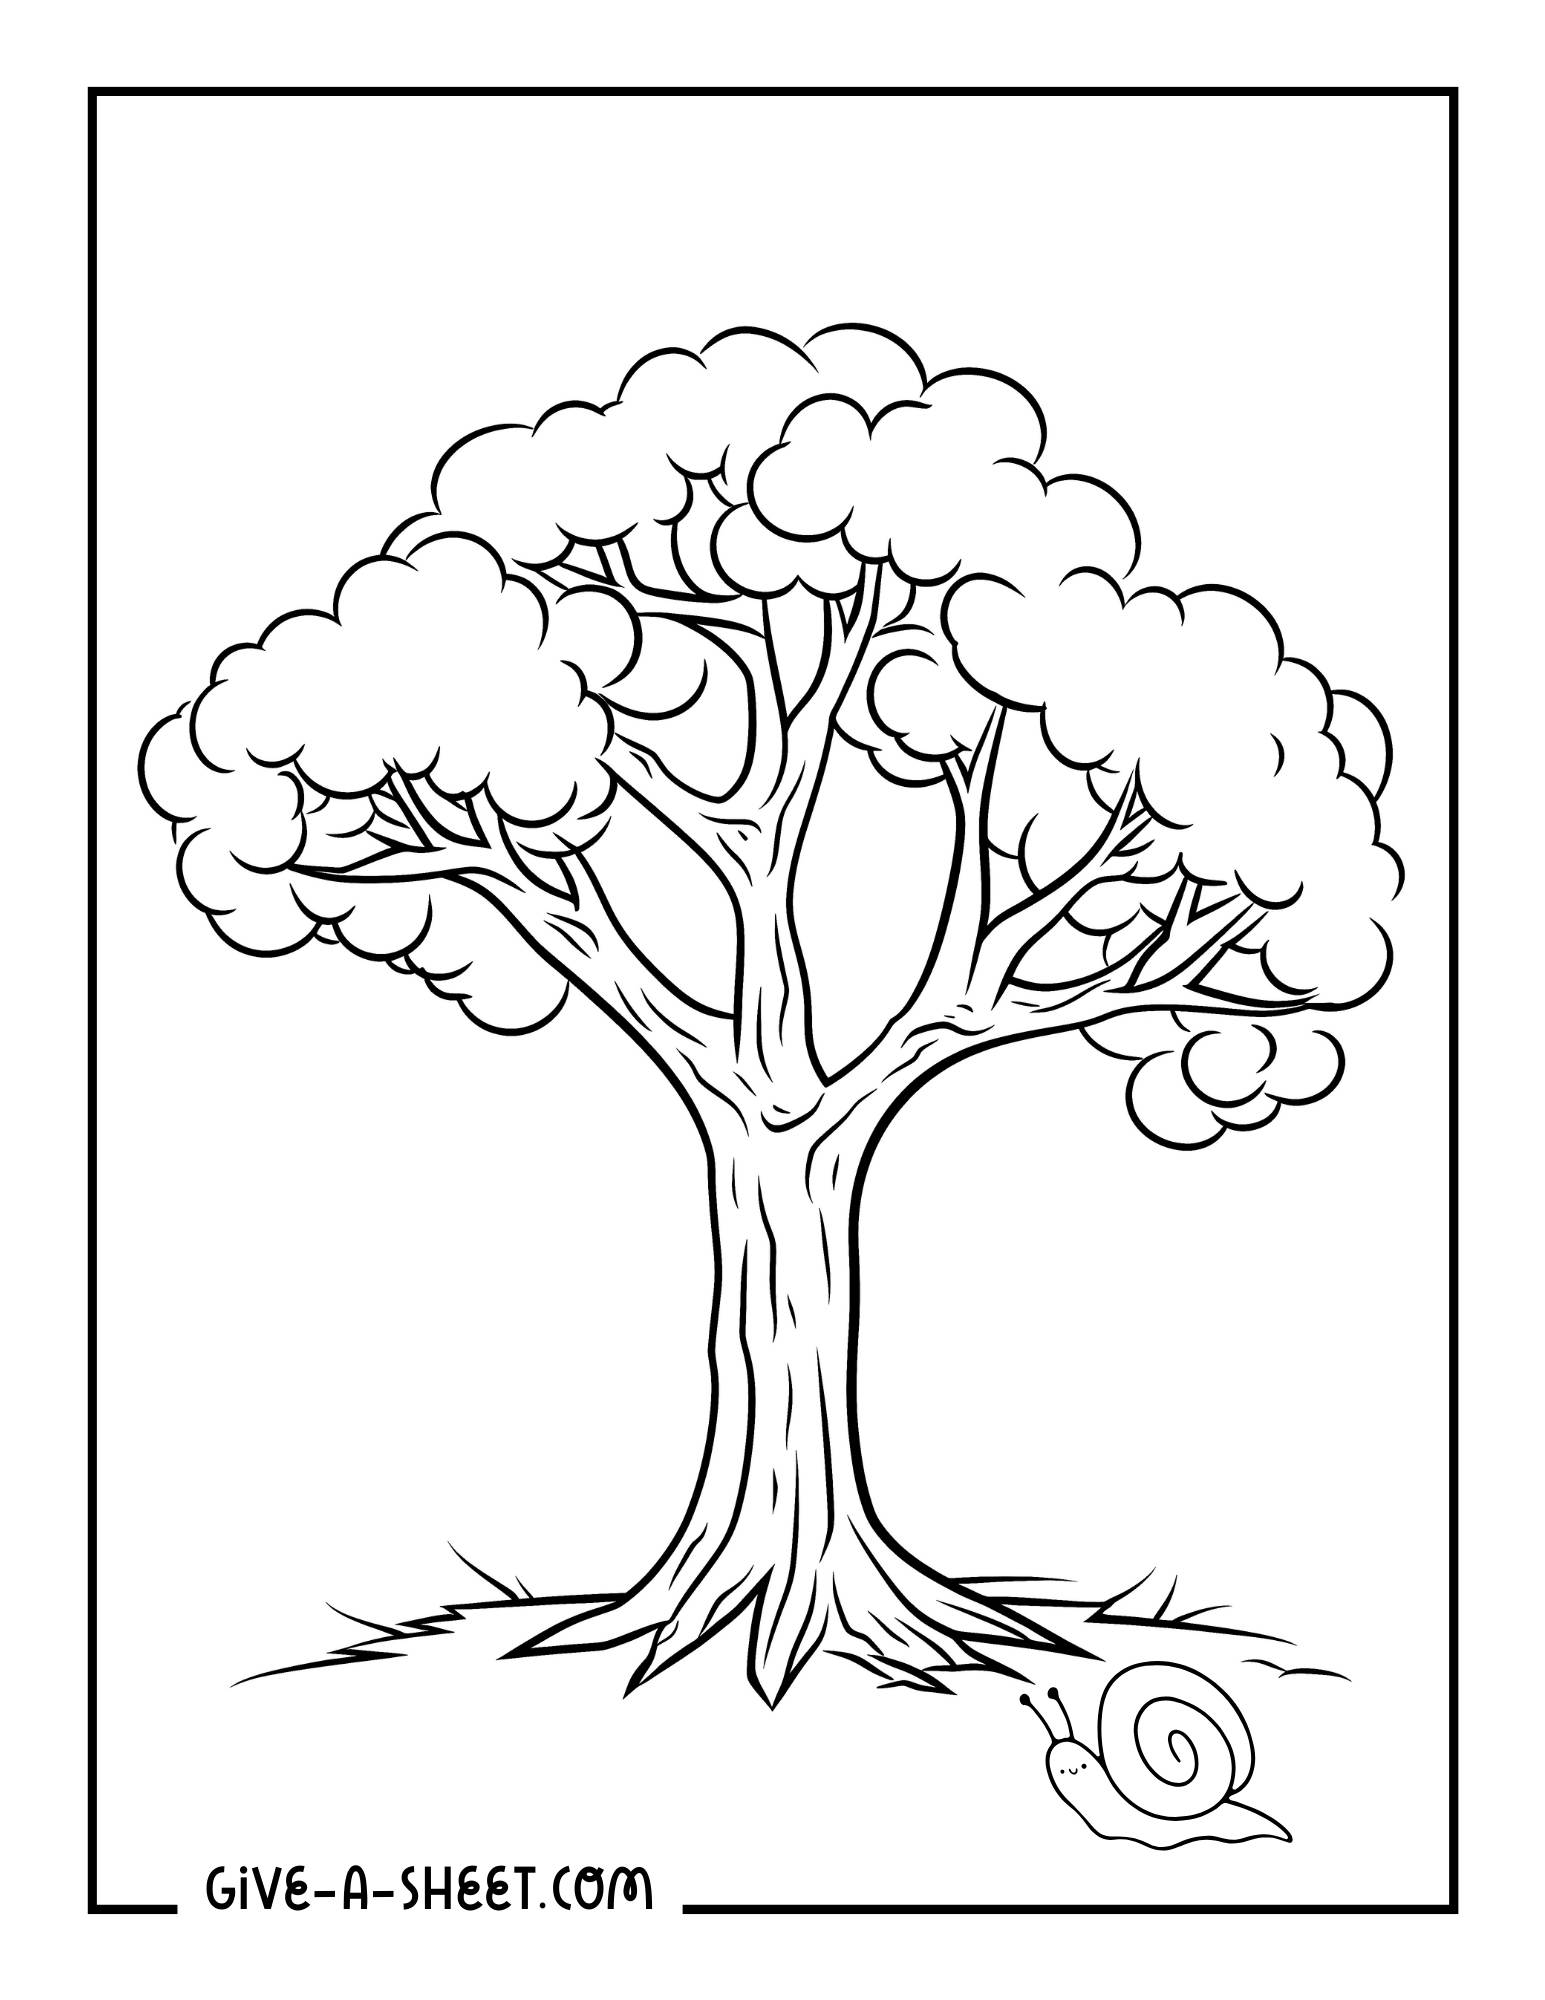 Tree pictures to color in for kids of all ages.